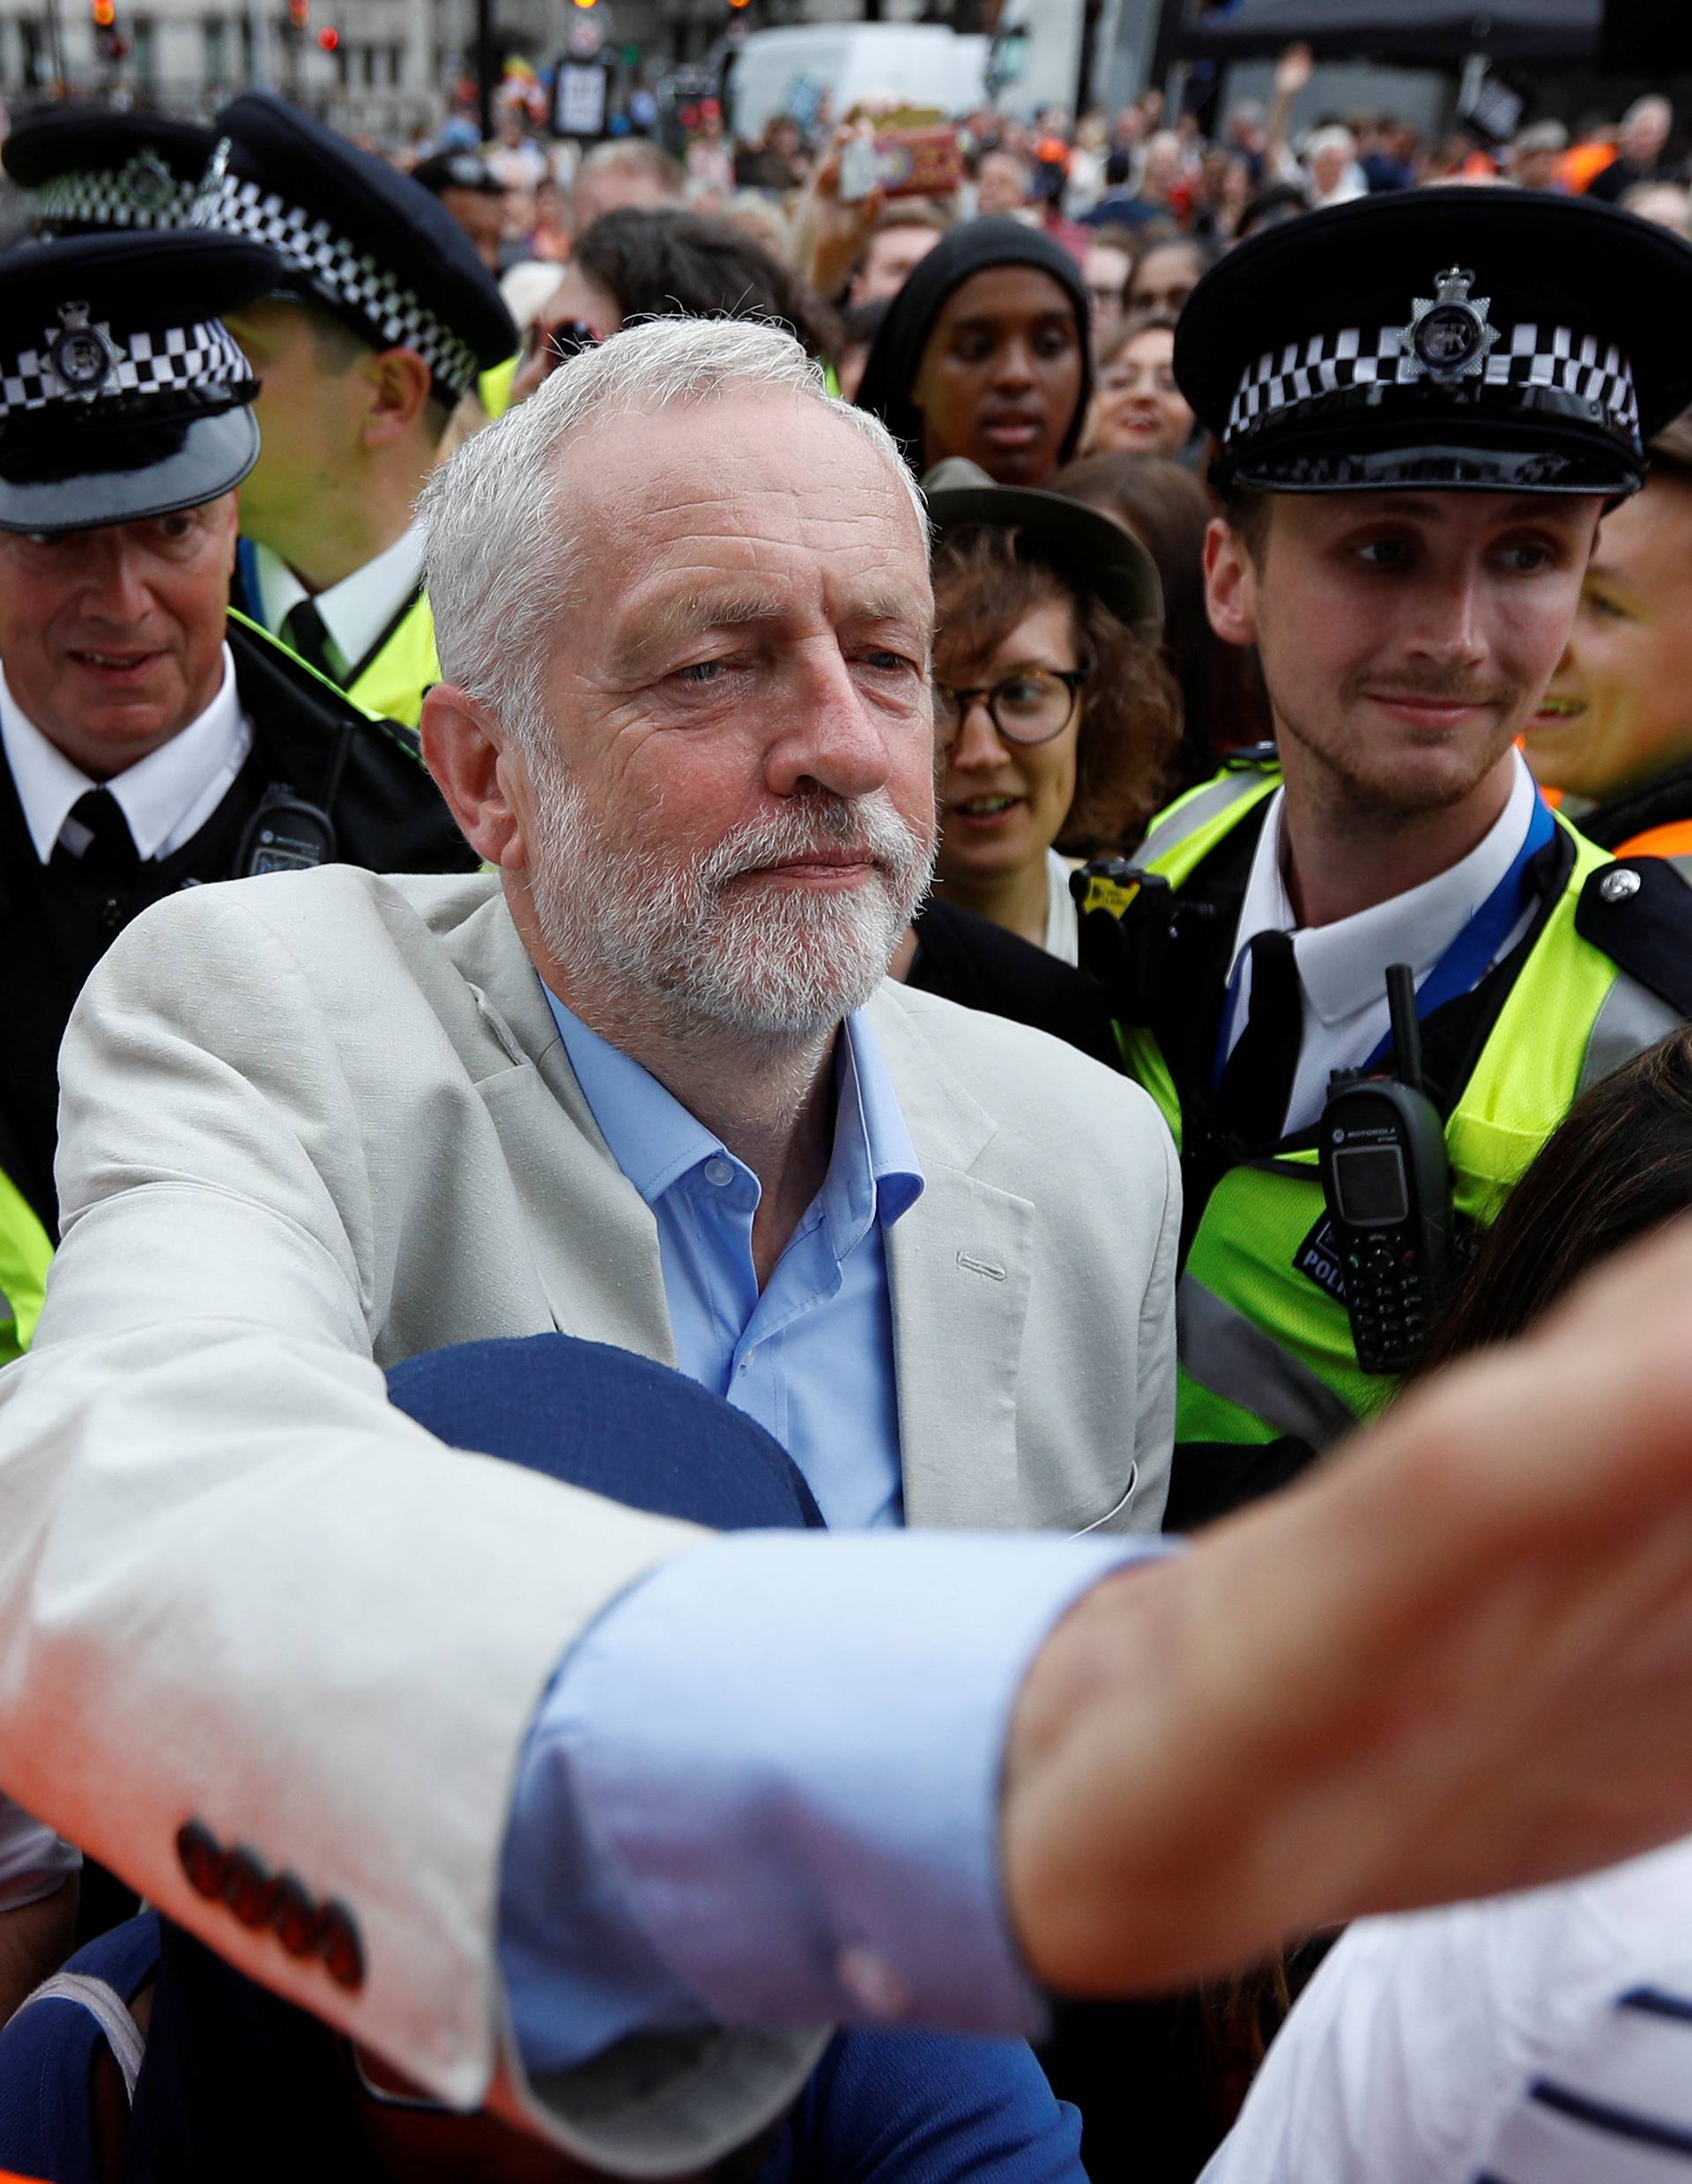 Britain's opposition Labour Party leader, Jeremy Corbyn, leaves after addressing an anti-austerity rally organised by campaigners Peoples' Assembly, in Parliament Square, in central London